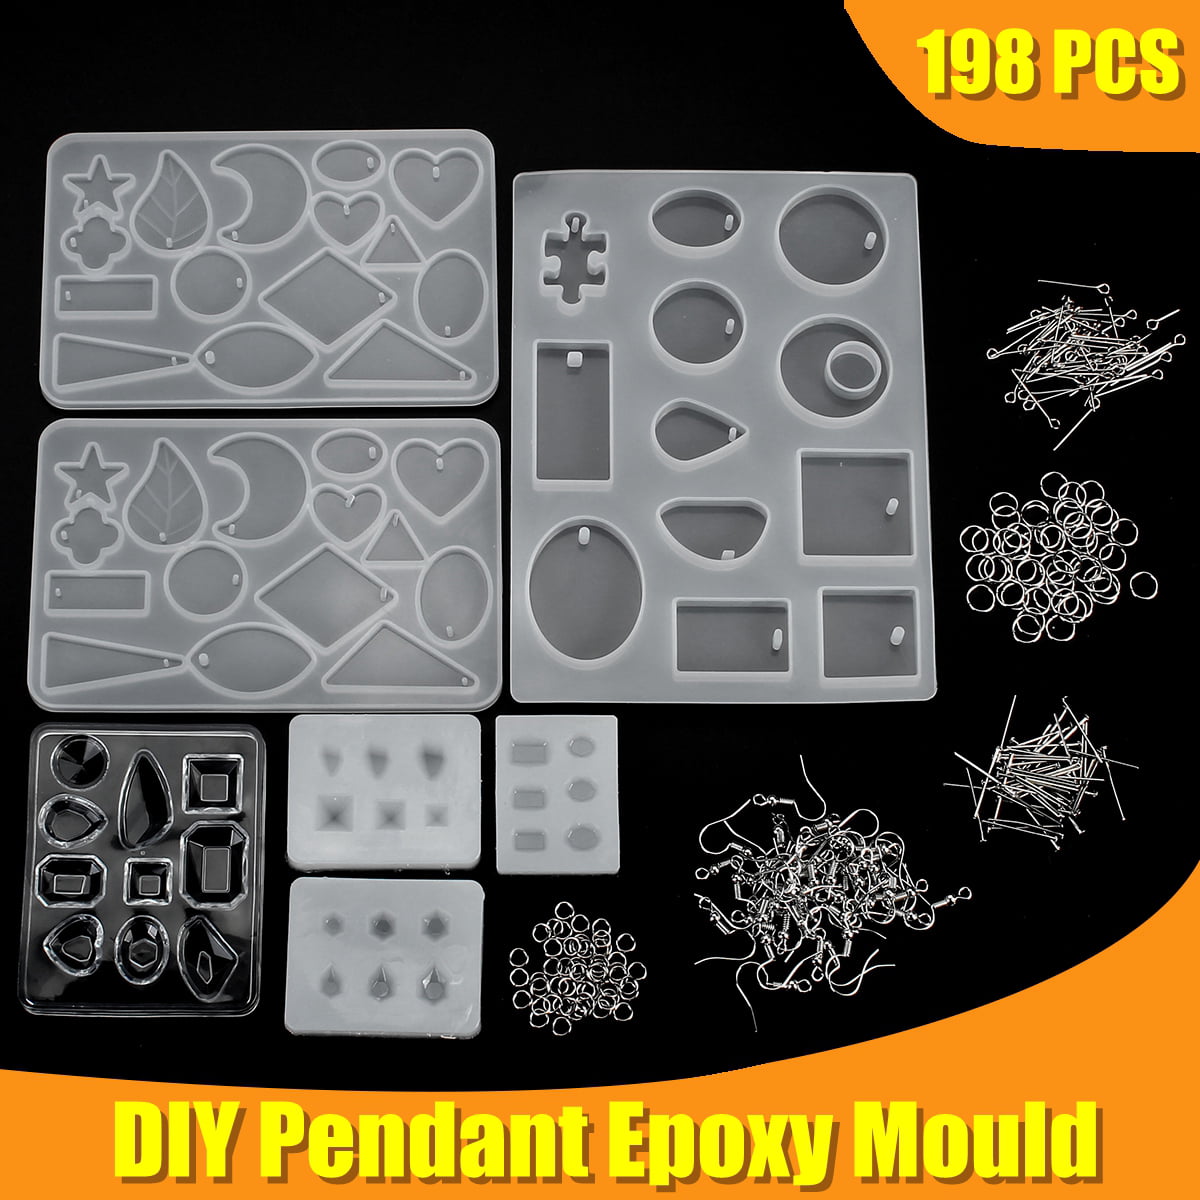 Eye Screw Pins and Making Tools for Jewelry Craft Making JMPZDZ Stud Earrings SEVEN HITECH Silicone Resin Kits Jewelry Casting Mould Tools Set Included Jewelry Pendant Moulds